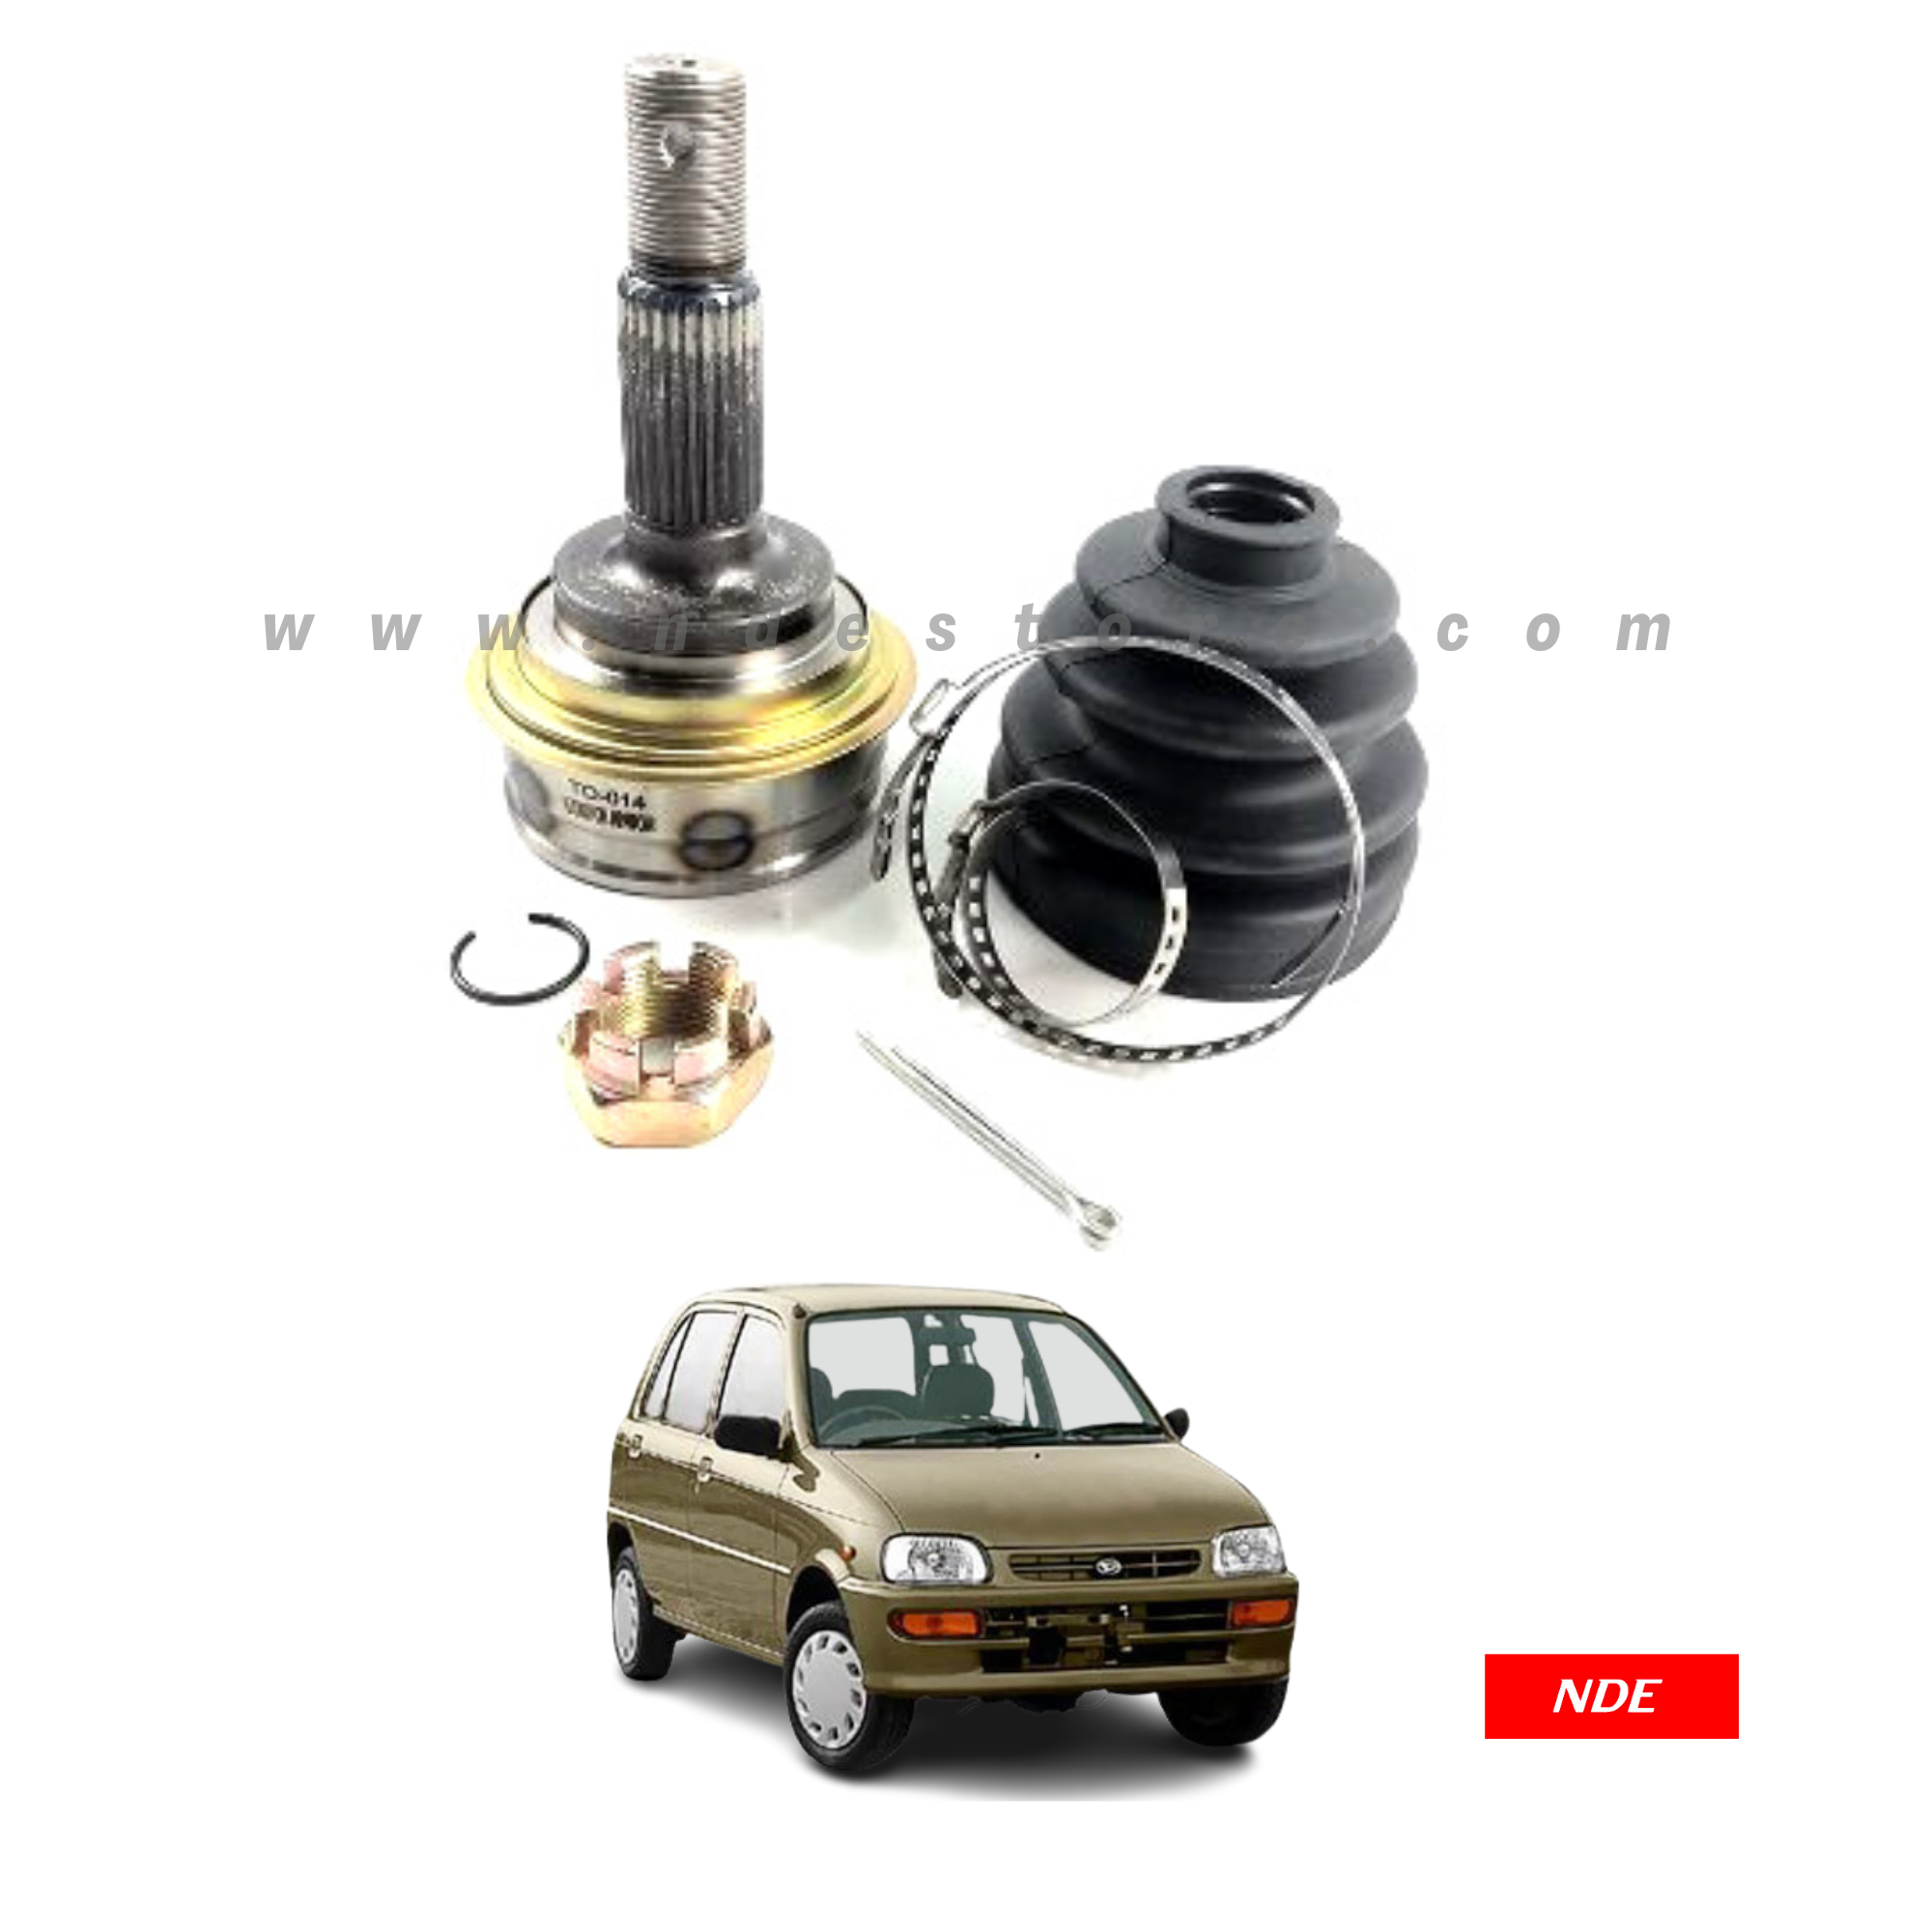 AXLE JOINT - C.V JOINT COMPLETE KIT OUTER FOR DAIHATSU CUORE